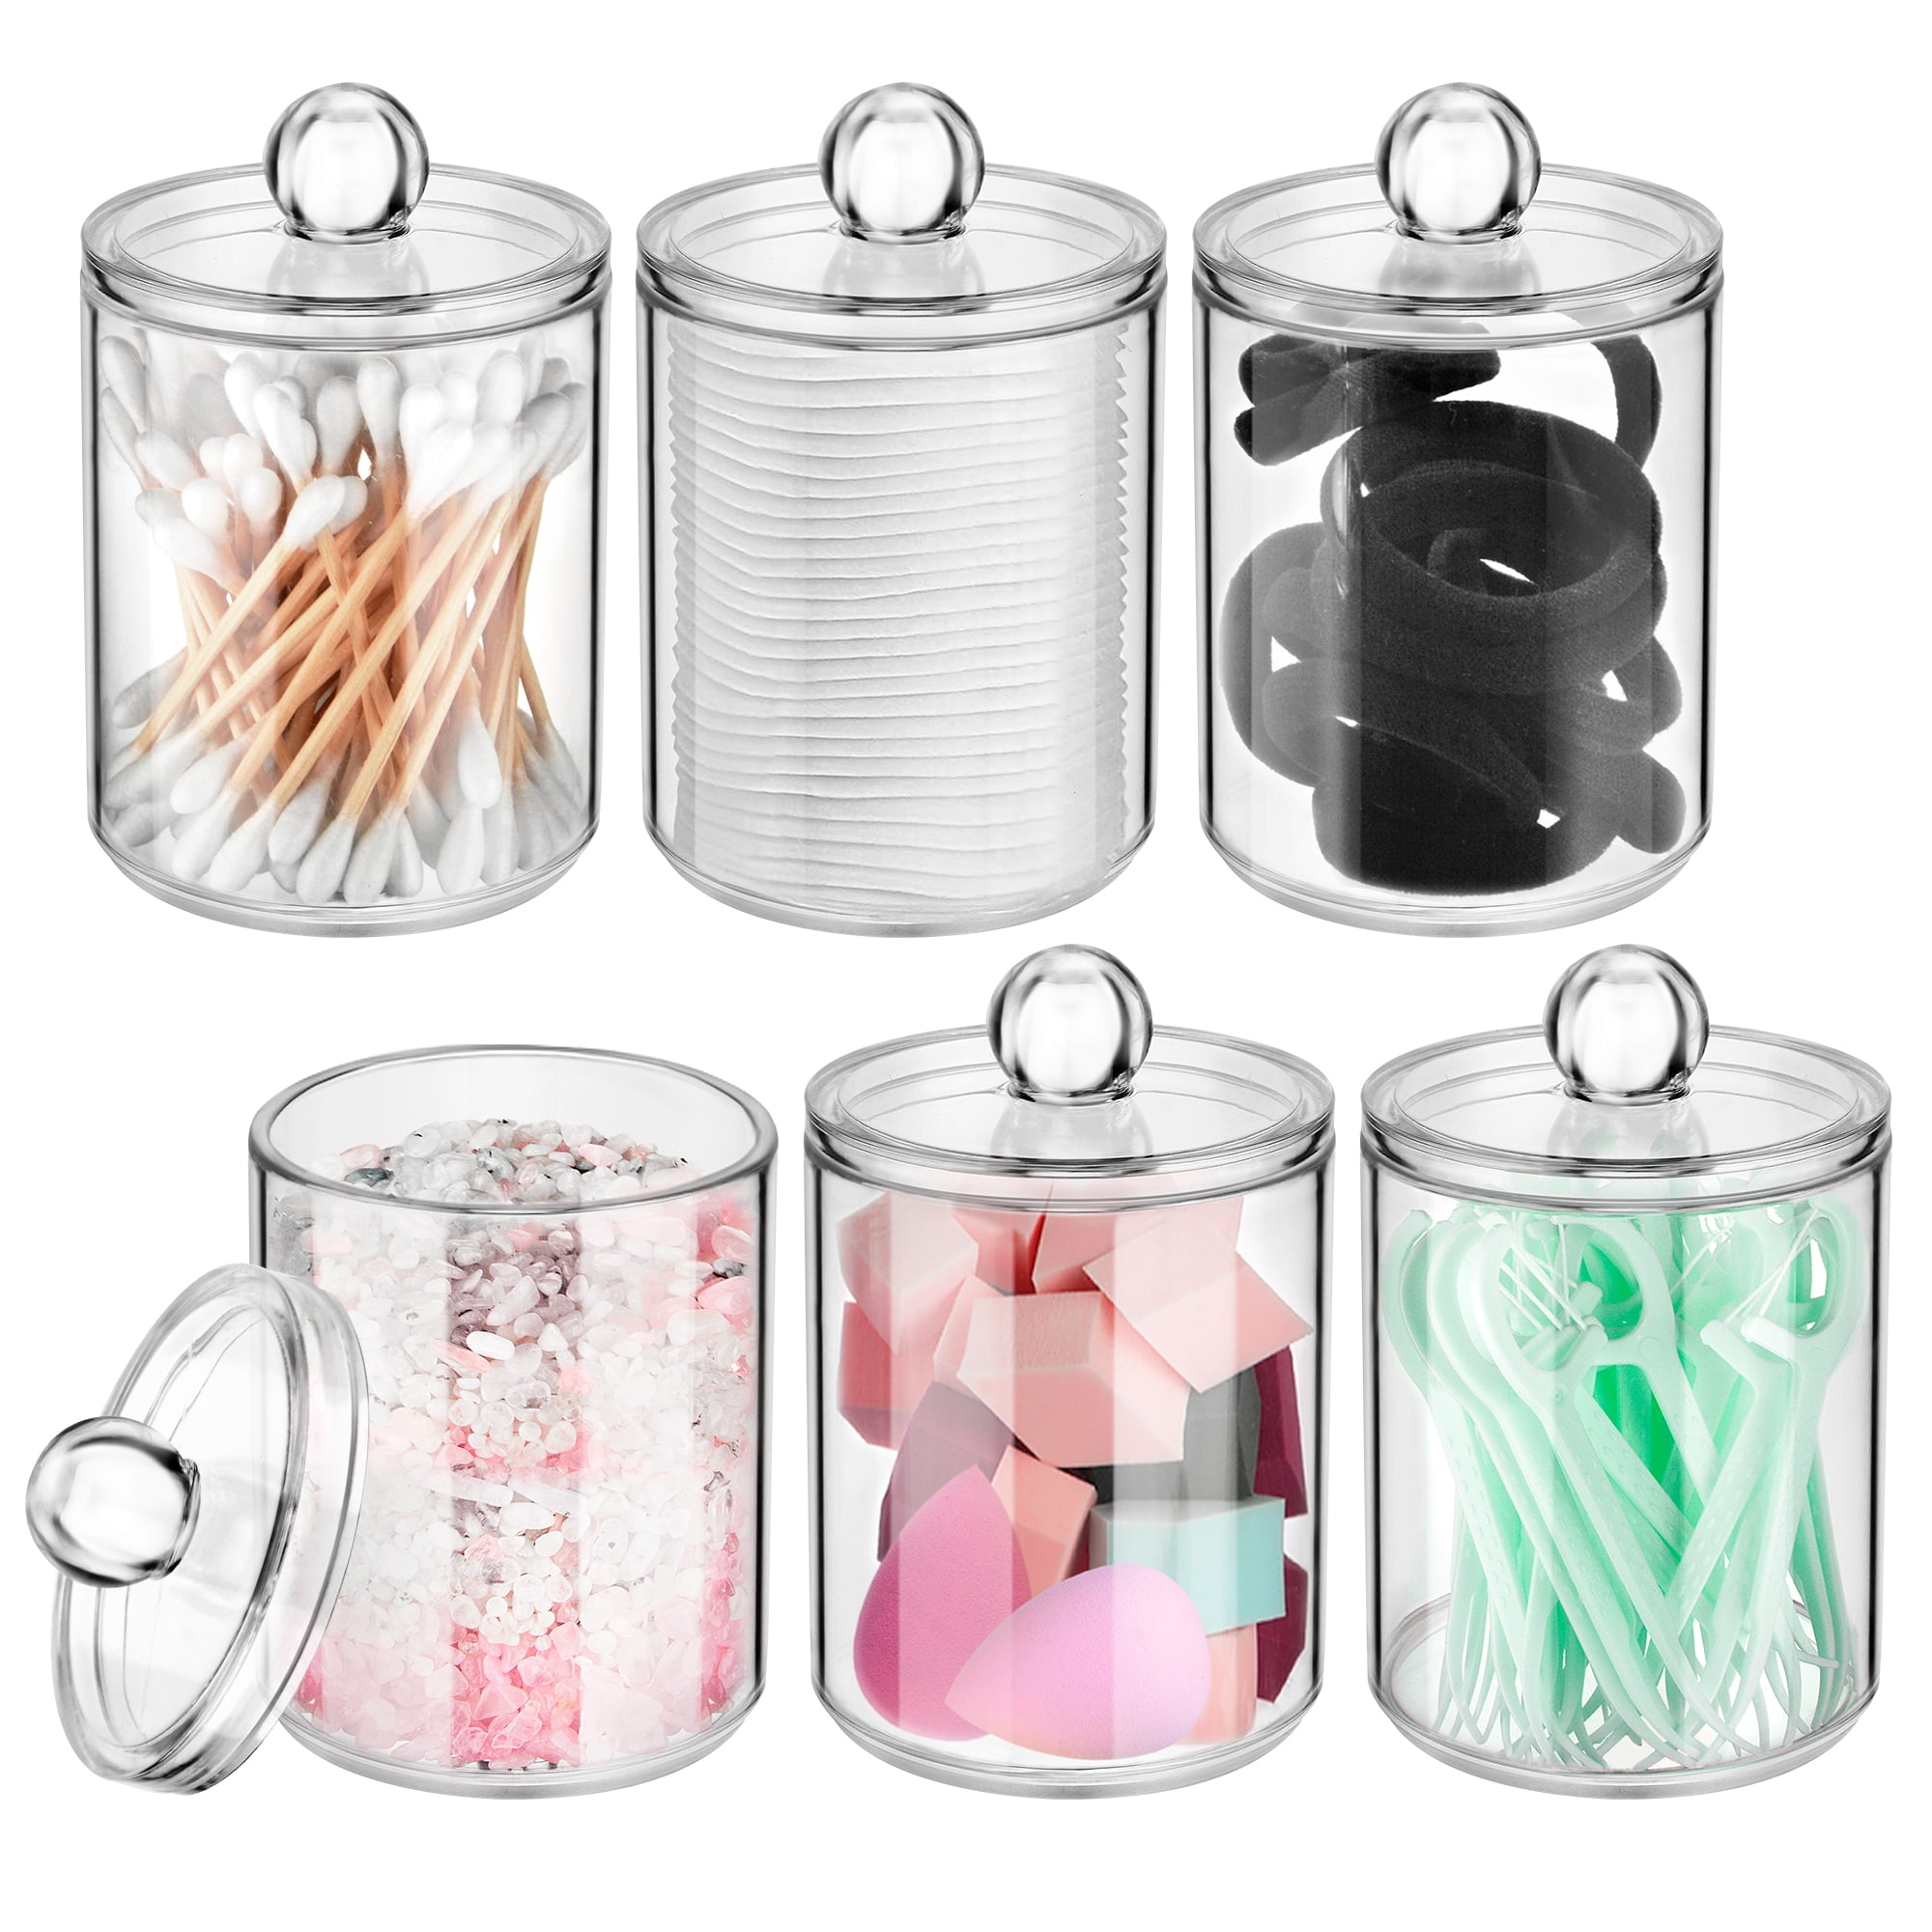 Clear/Rose Gold Practical Cotton Swab Organiser mDesign Clear Cotton Swab Container with Lid Cotton Ball Holder for The Bathroom Set of 2 